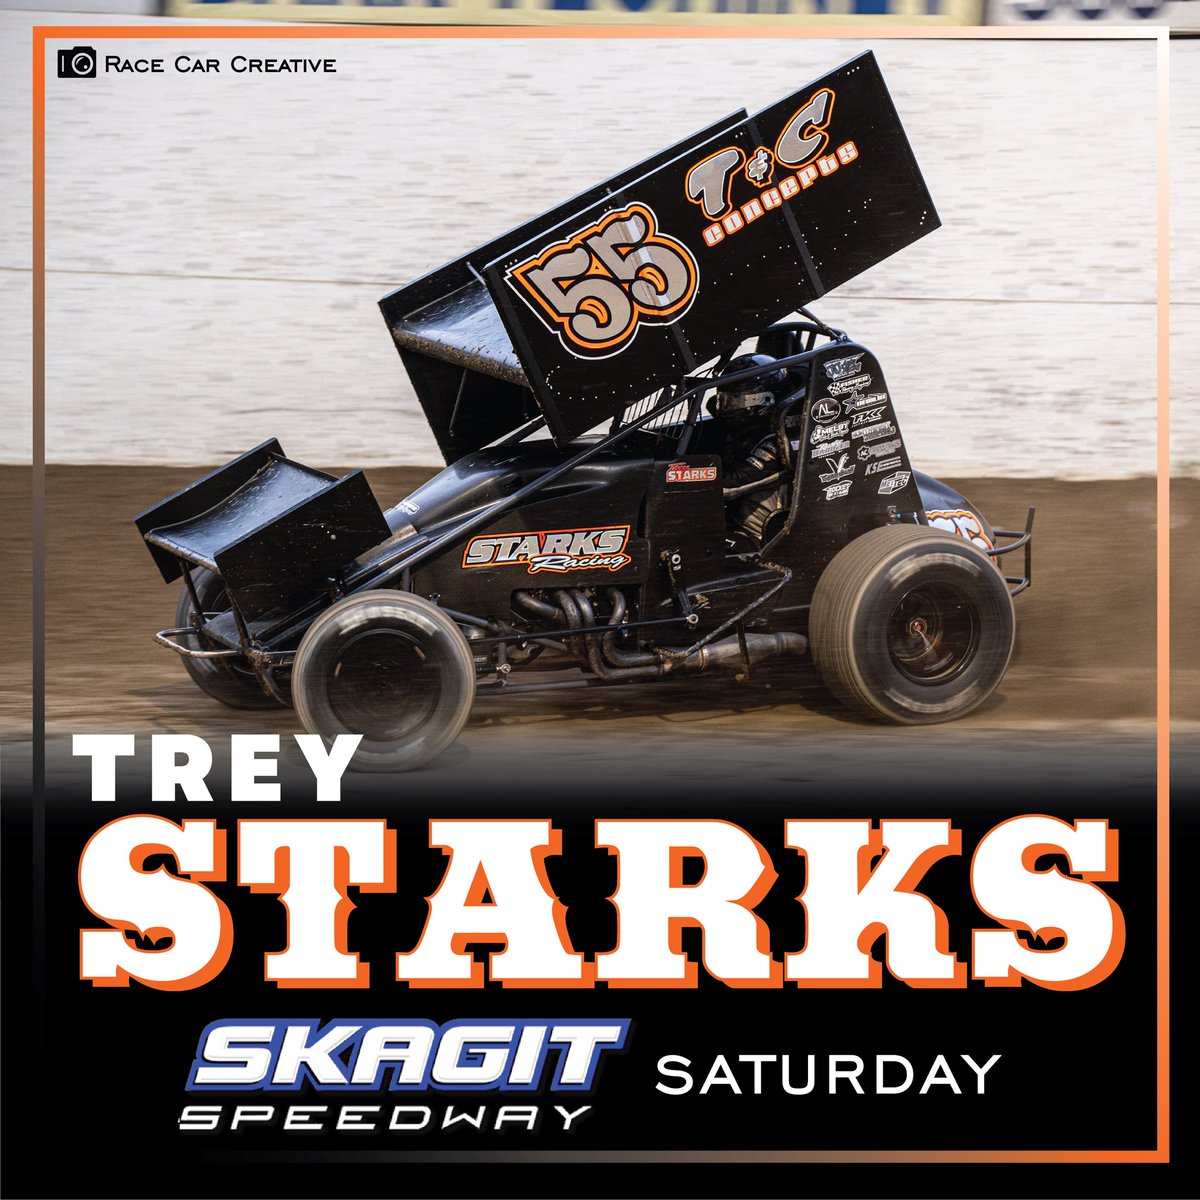 Racing in two sprint car divisions is the plan for @Starks55Trey this Saturday! #TeamILP